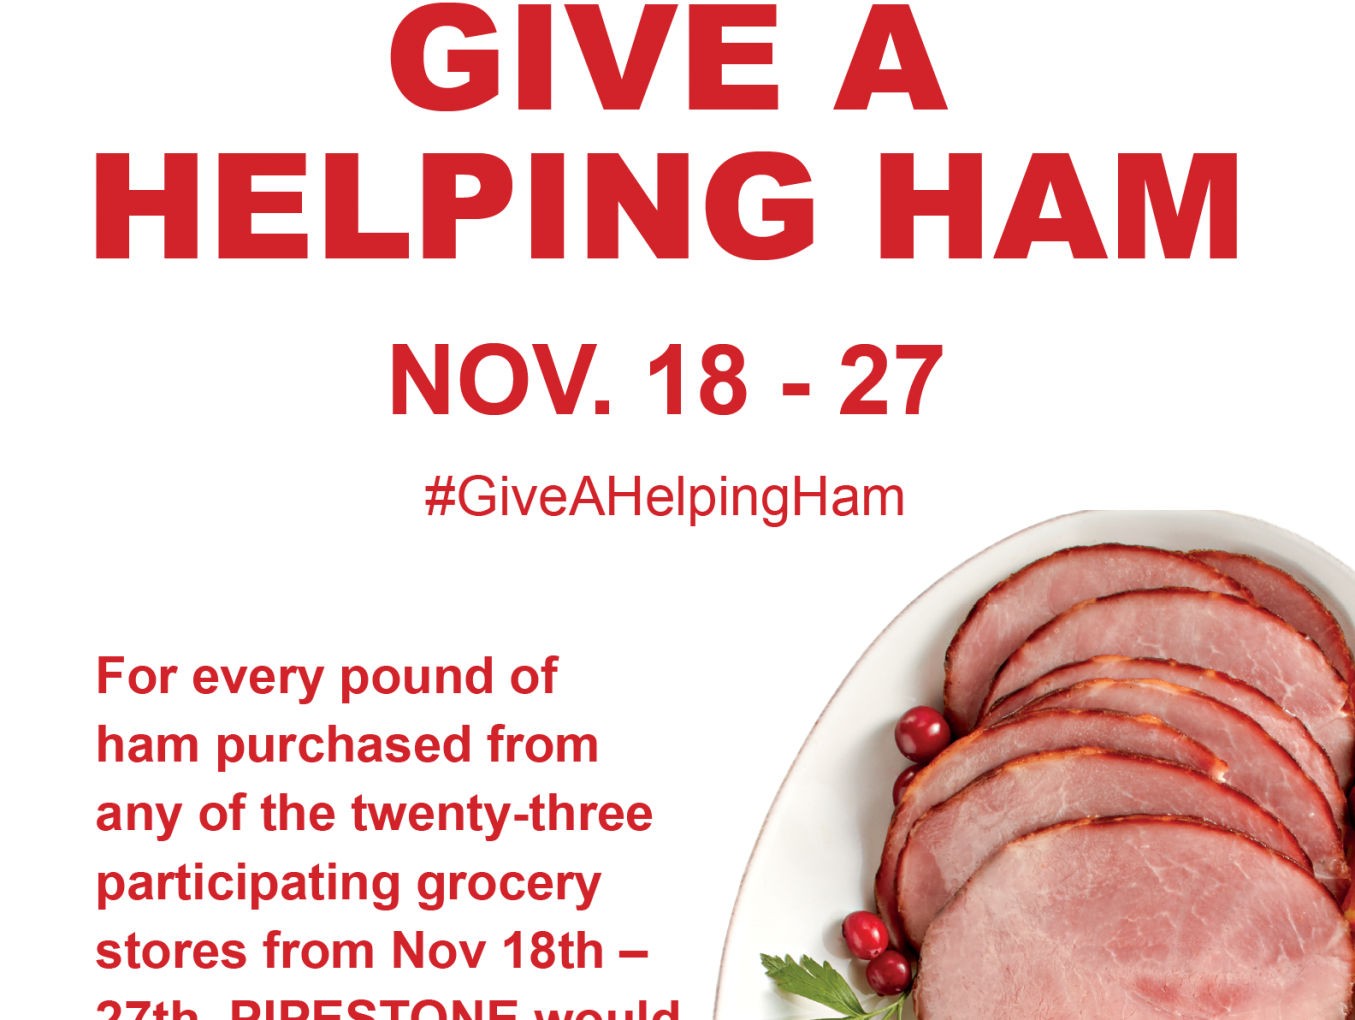 PIPESTONE Donates Over 1 Million Servings of Pork Through Give a Helping Ham Program